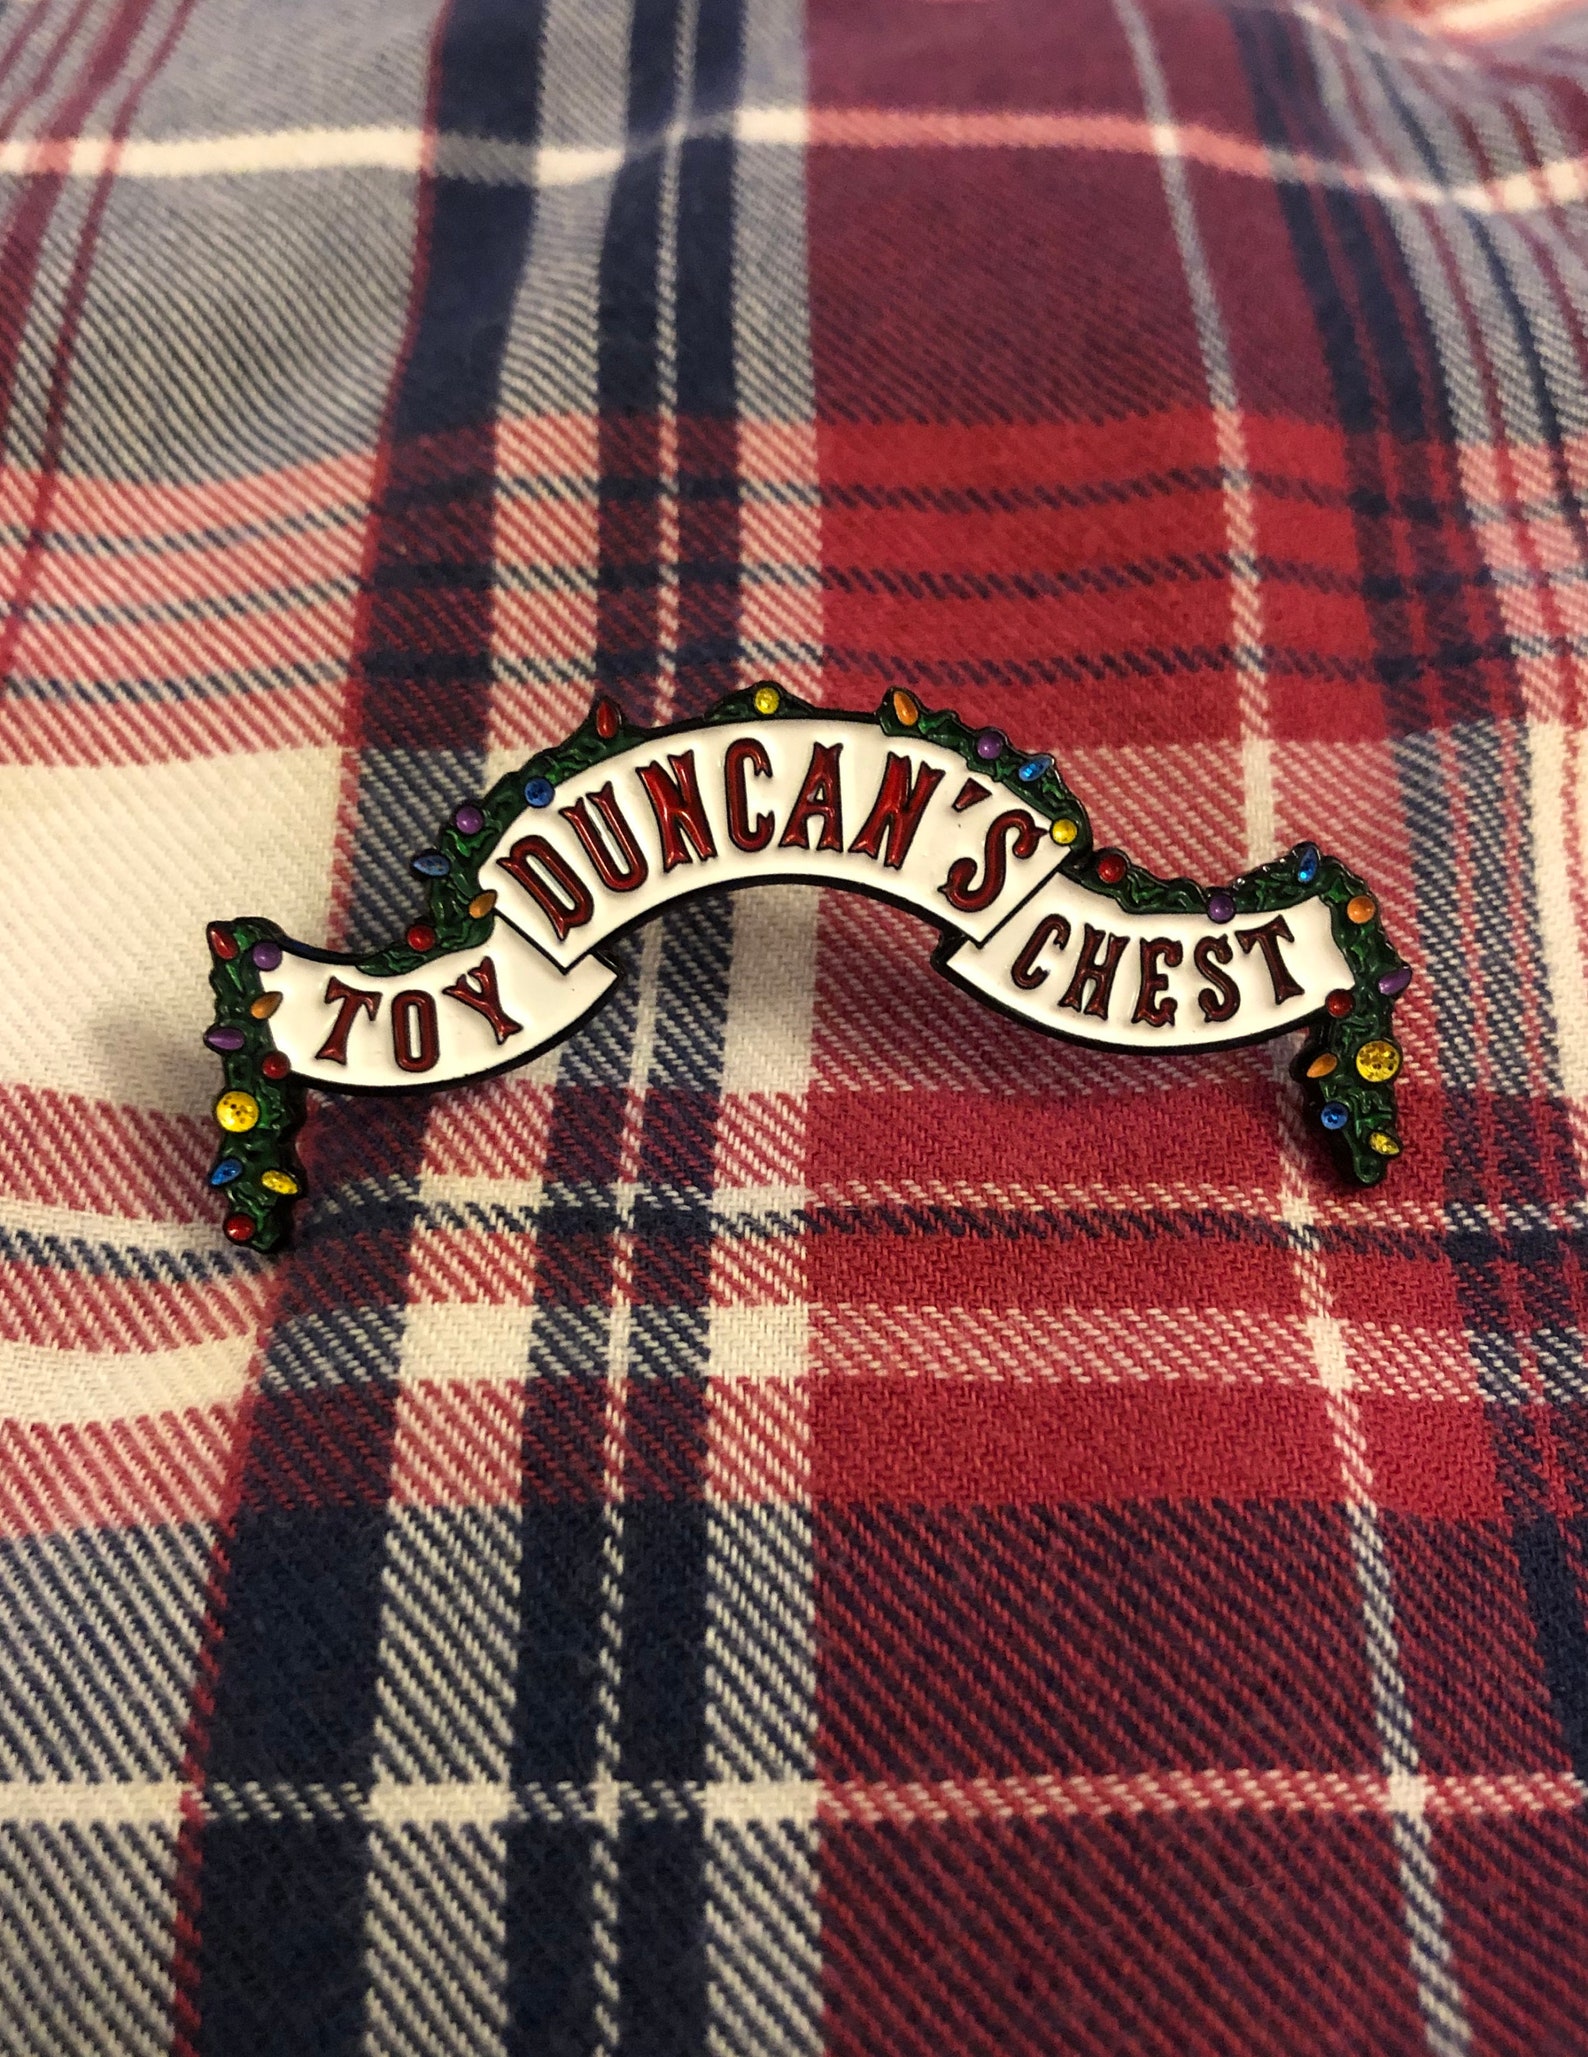 Home Alone 2 Duncans Toy Chest Soft Enamel Pin | Etsy